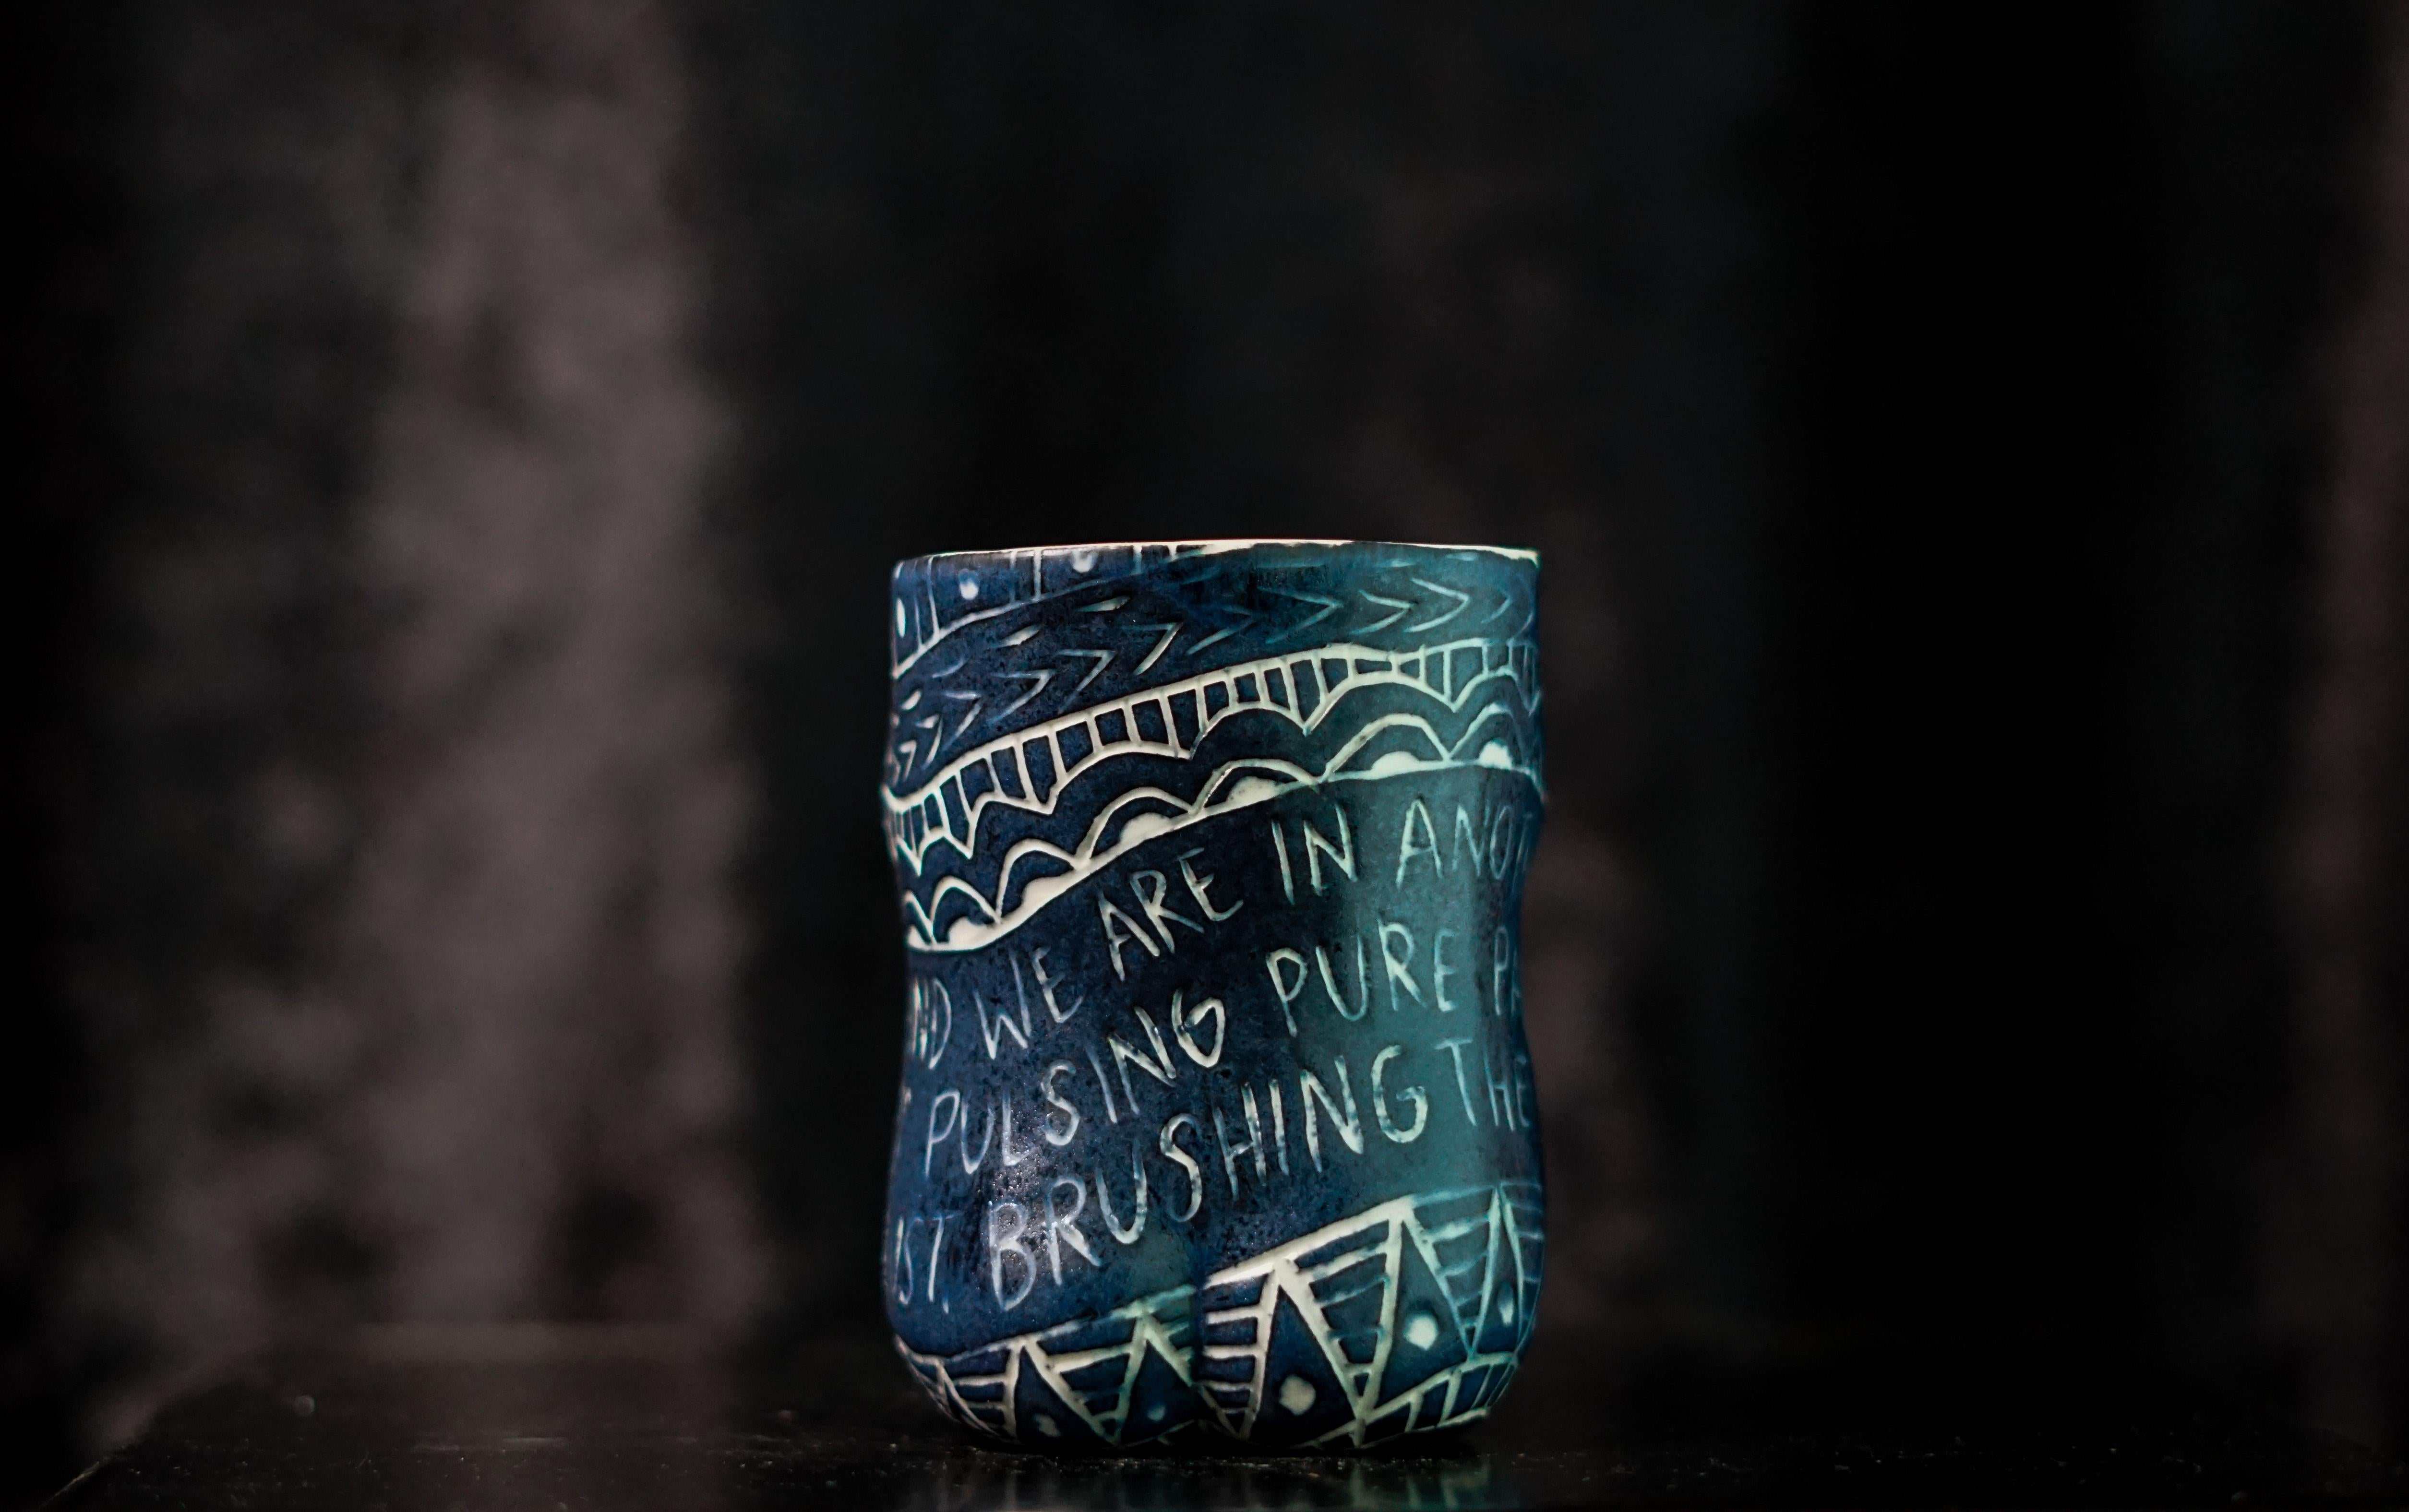 “And You Blink..”, 2019
From the series Fragments of Our Love Story
Porcelain cup with sgraffito detailing
4 x 3 x 3 inches.

“And you blink..” And you blink and we are in another moment. Fingertips pulsing pure passion into placating lust. Brushing